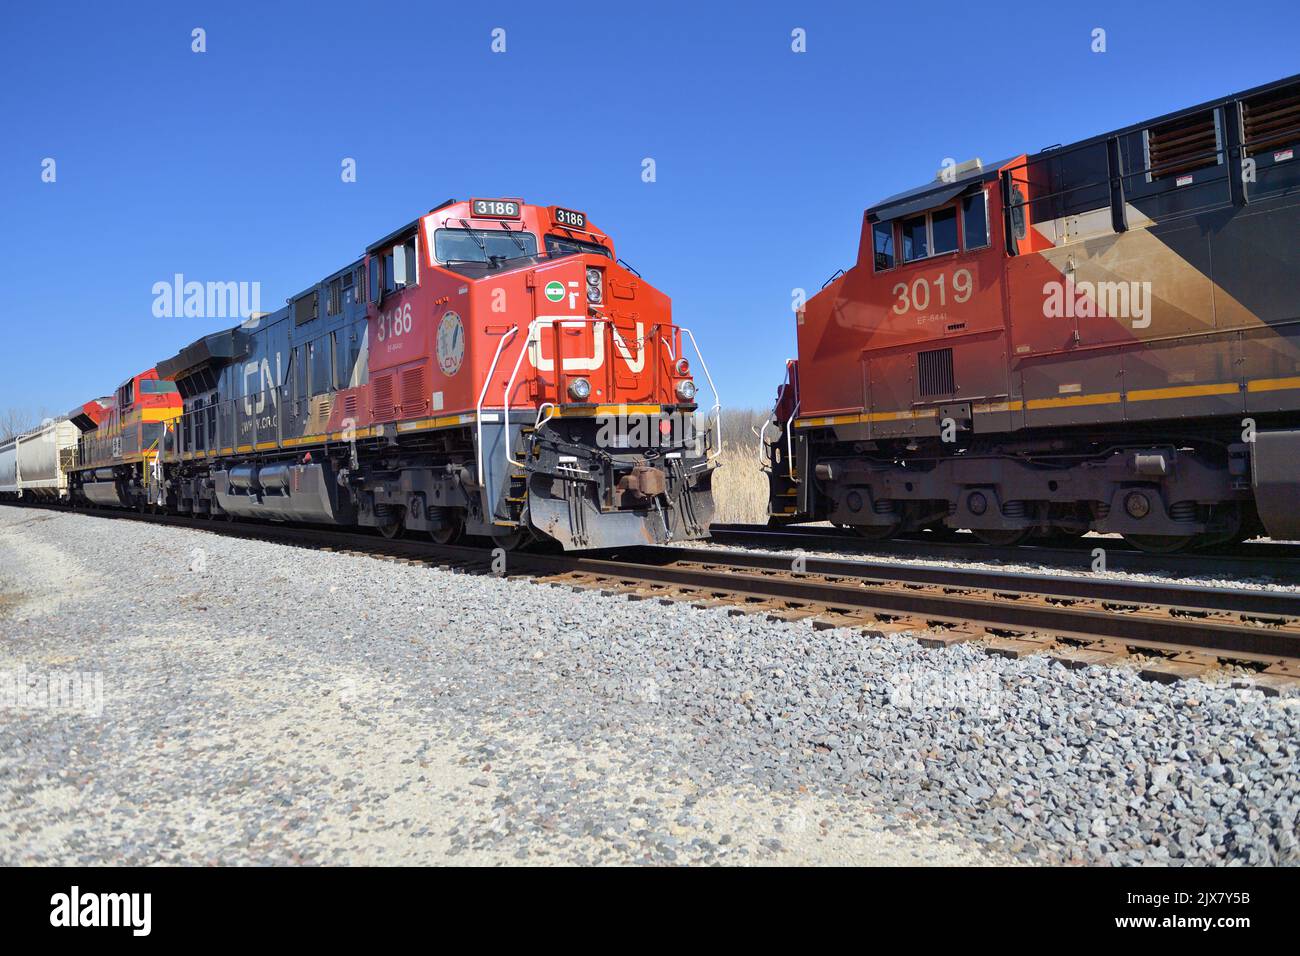 Hoffman Estates, Illinois, USA. A Canadian National Railway freight train, at left, holding on a siding being passed by another freight train. Stock Photo